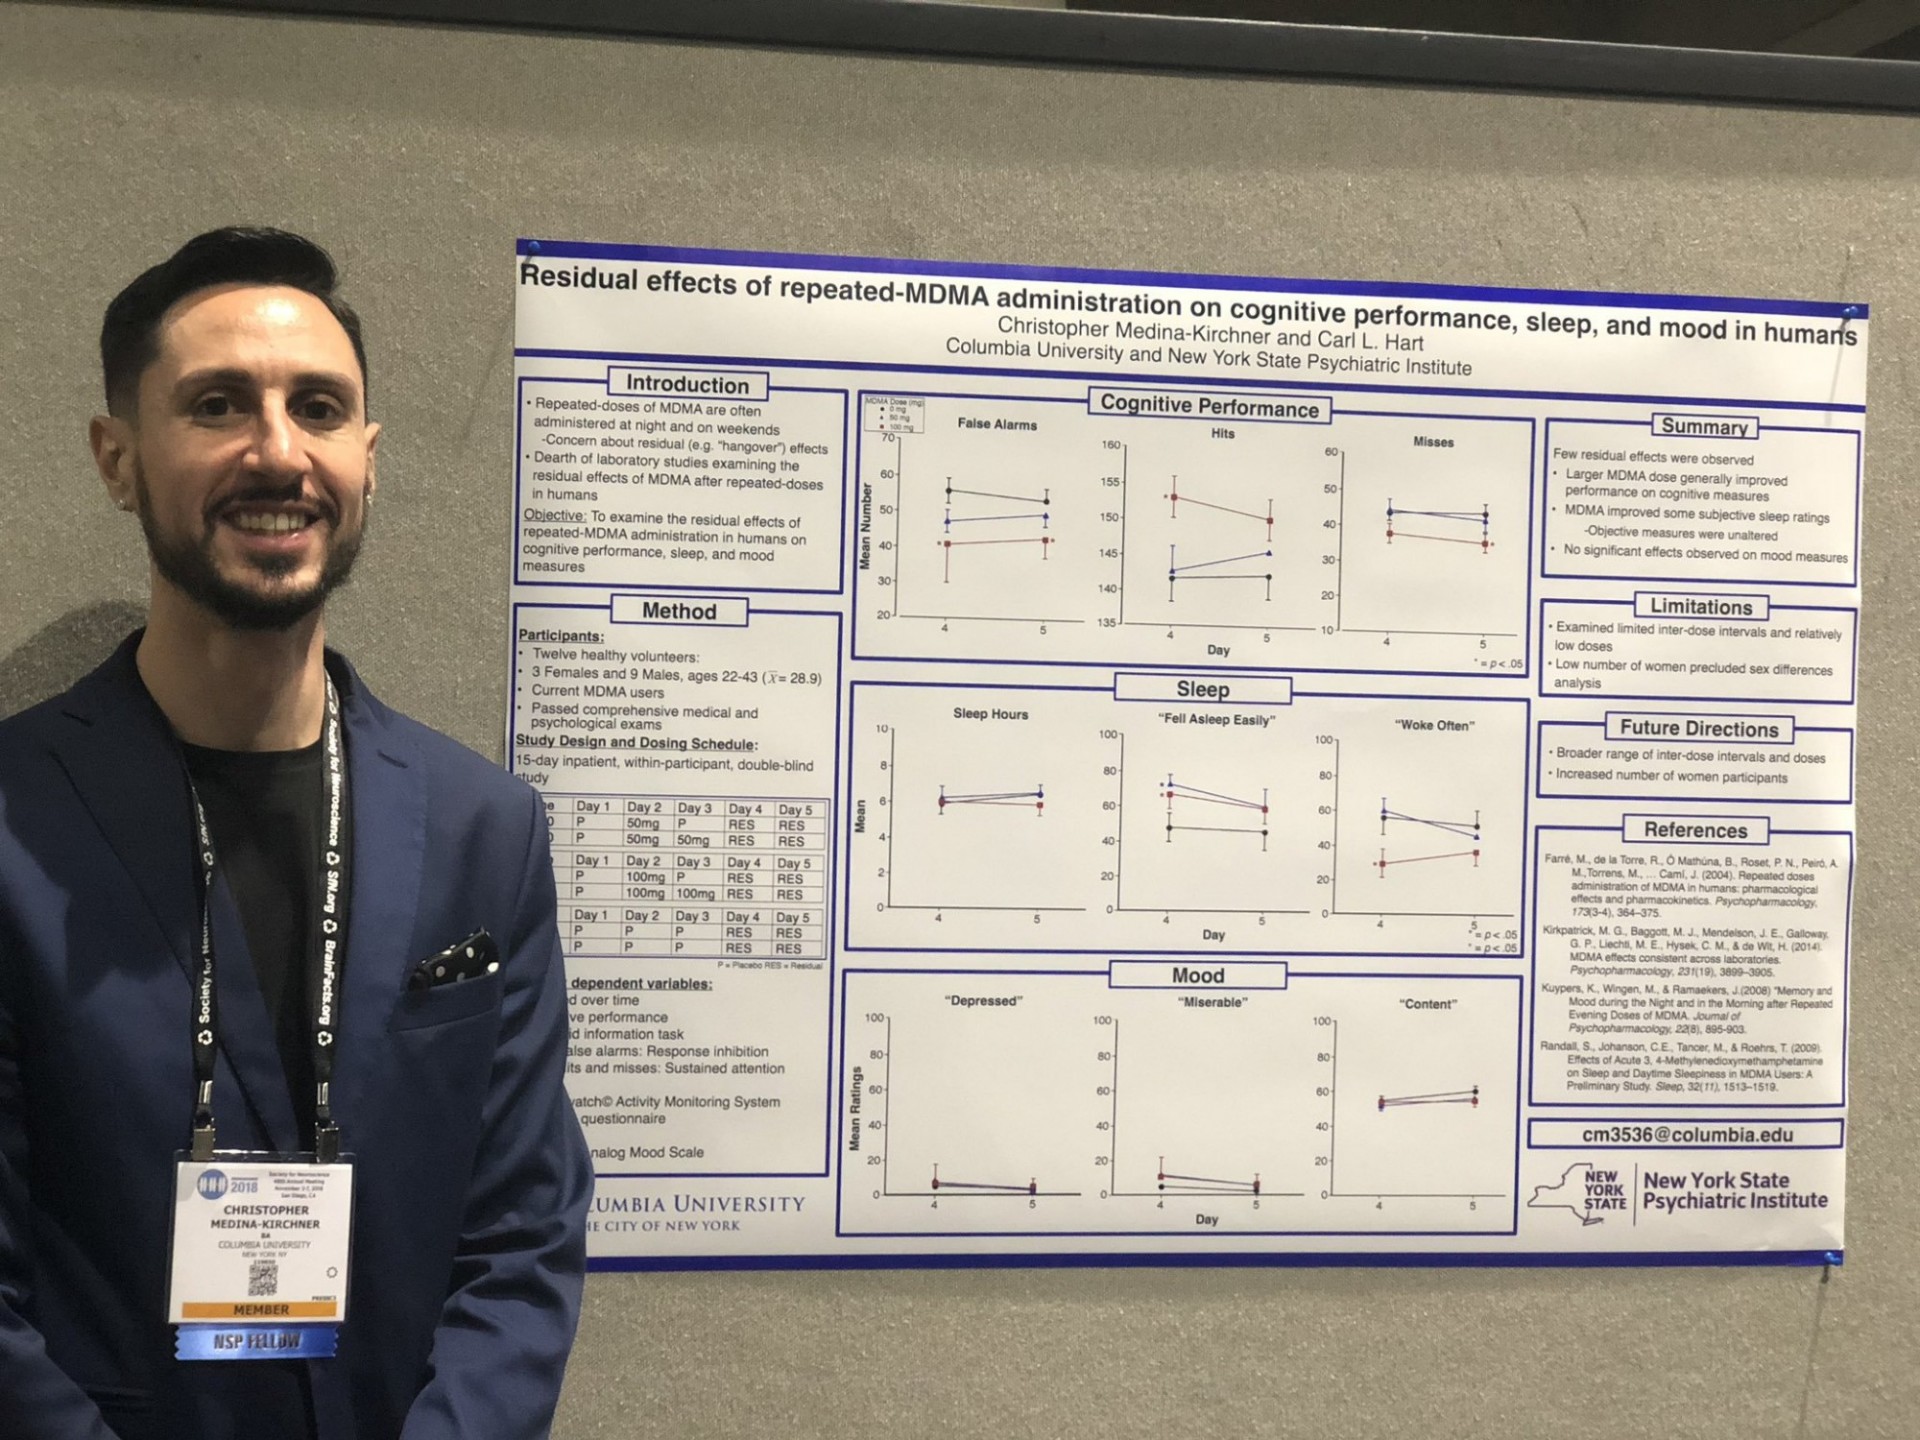 Christopher Medina-Kirchner presented his poster, “Residual effects of repeated-MDMA administration on cognitive performance, sleep, and mood in humans” at the Diversity Poster Session for the Neuroscience Scholars Program.